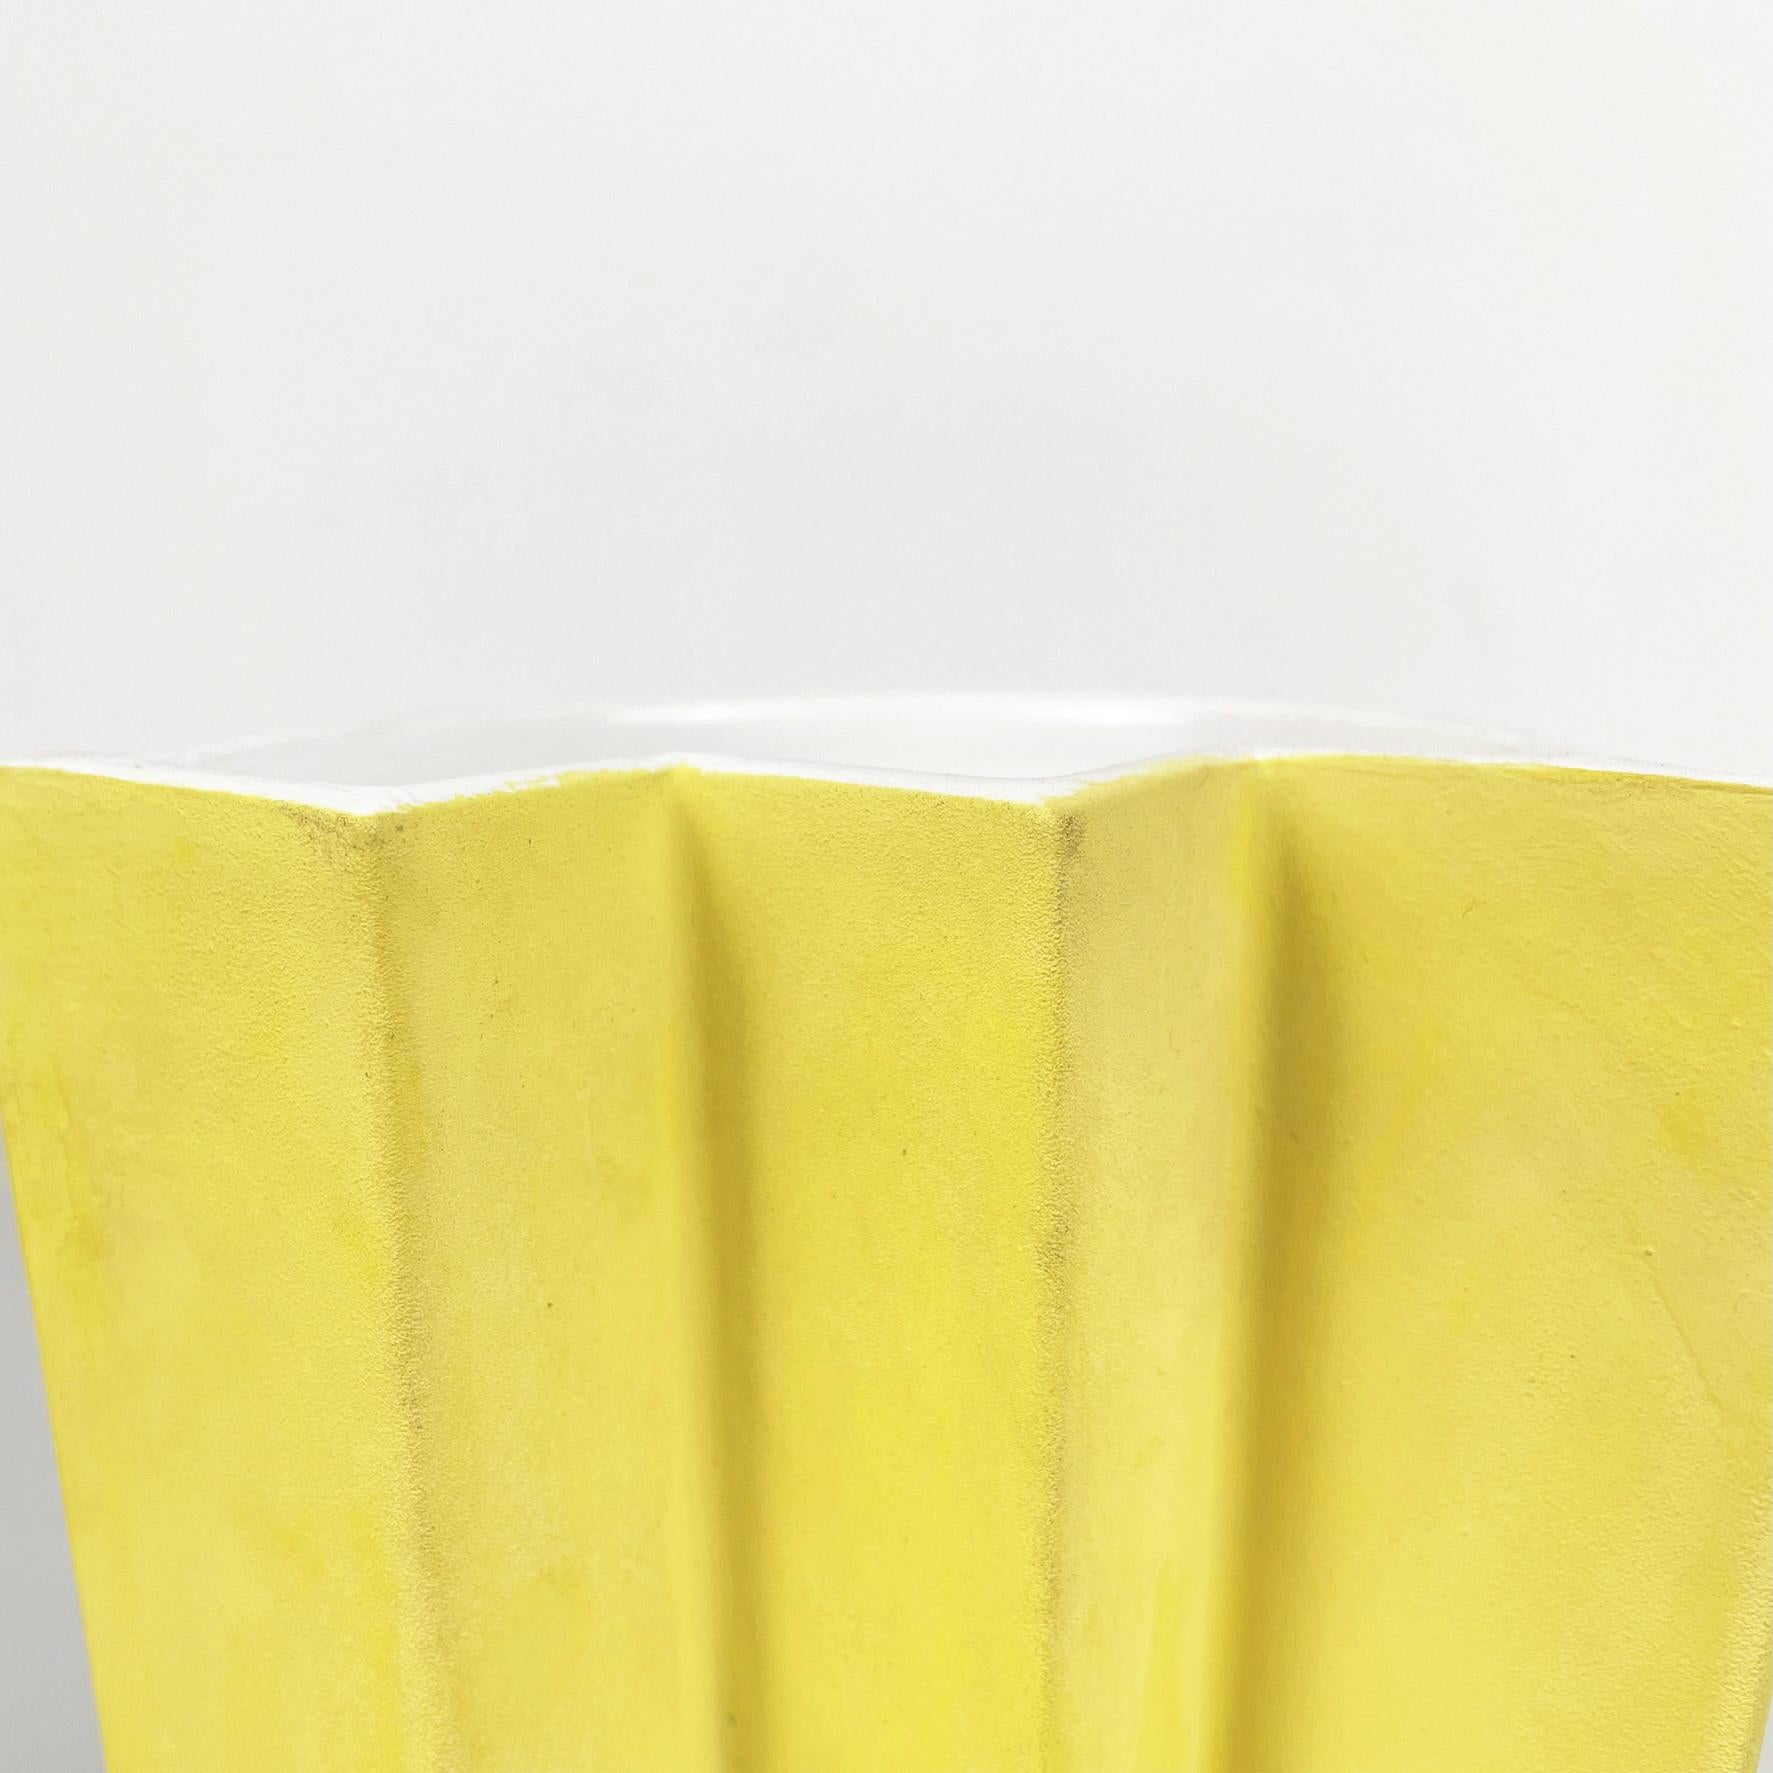 Italian Modern Yellow Ceramic Vase ET1 by Ettore Sottsass for A. Sarri, 1990s For Sale 3